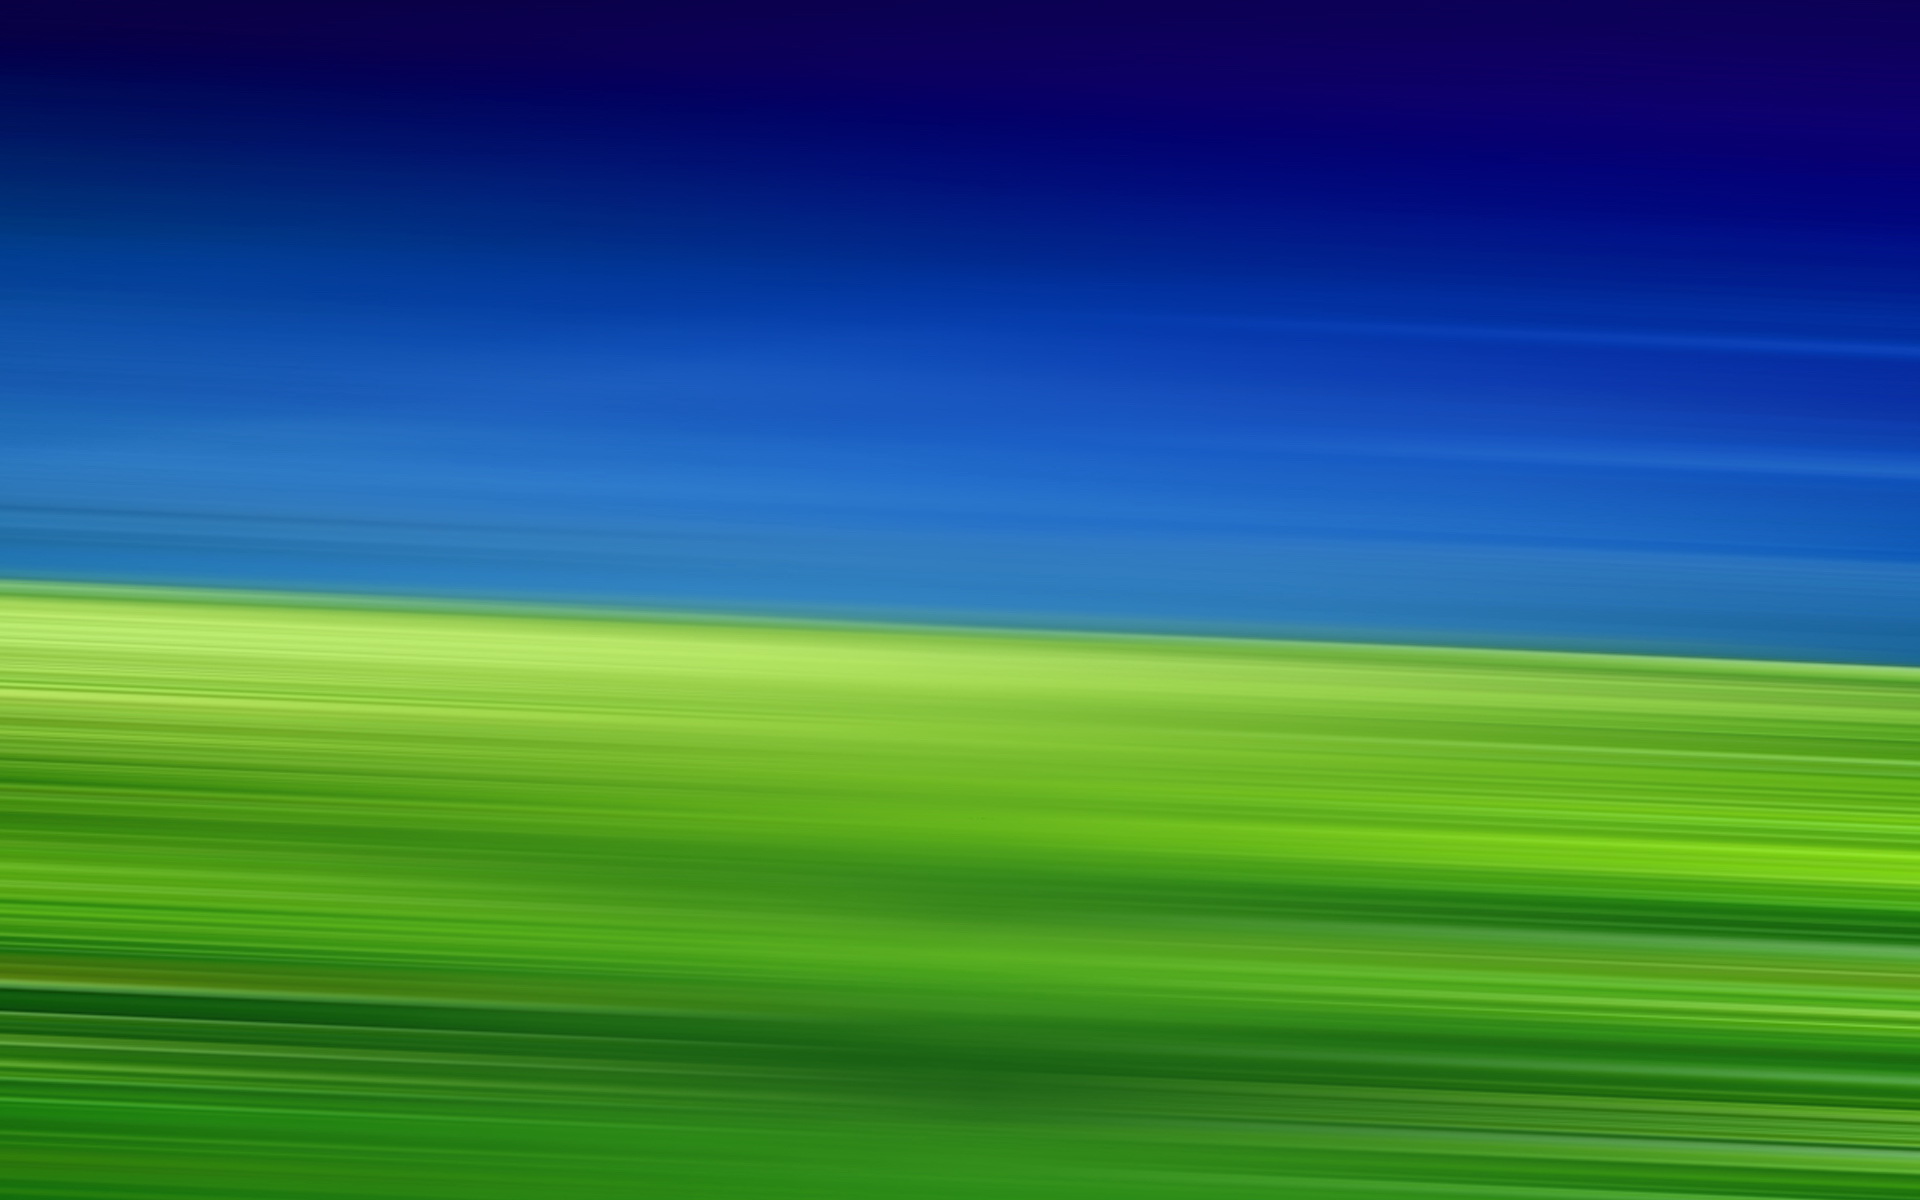 Free Green Blue Wallpapers 23ROFT2   4USkY